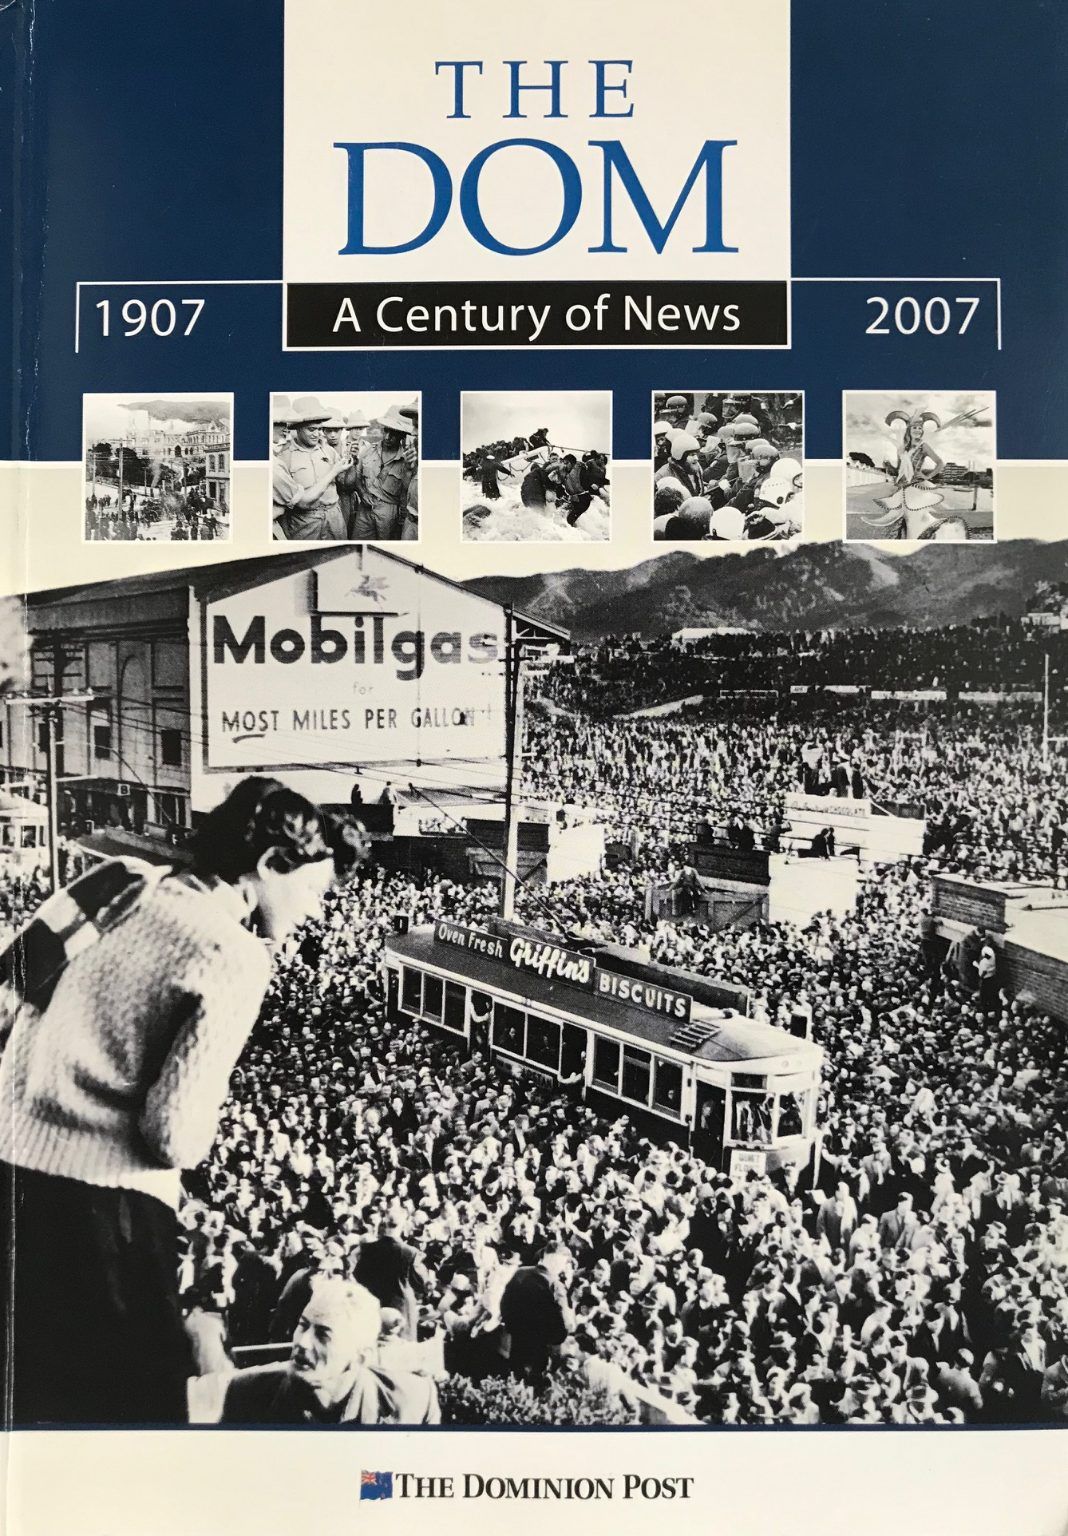 THE DOM: A Century of News 1907-2007